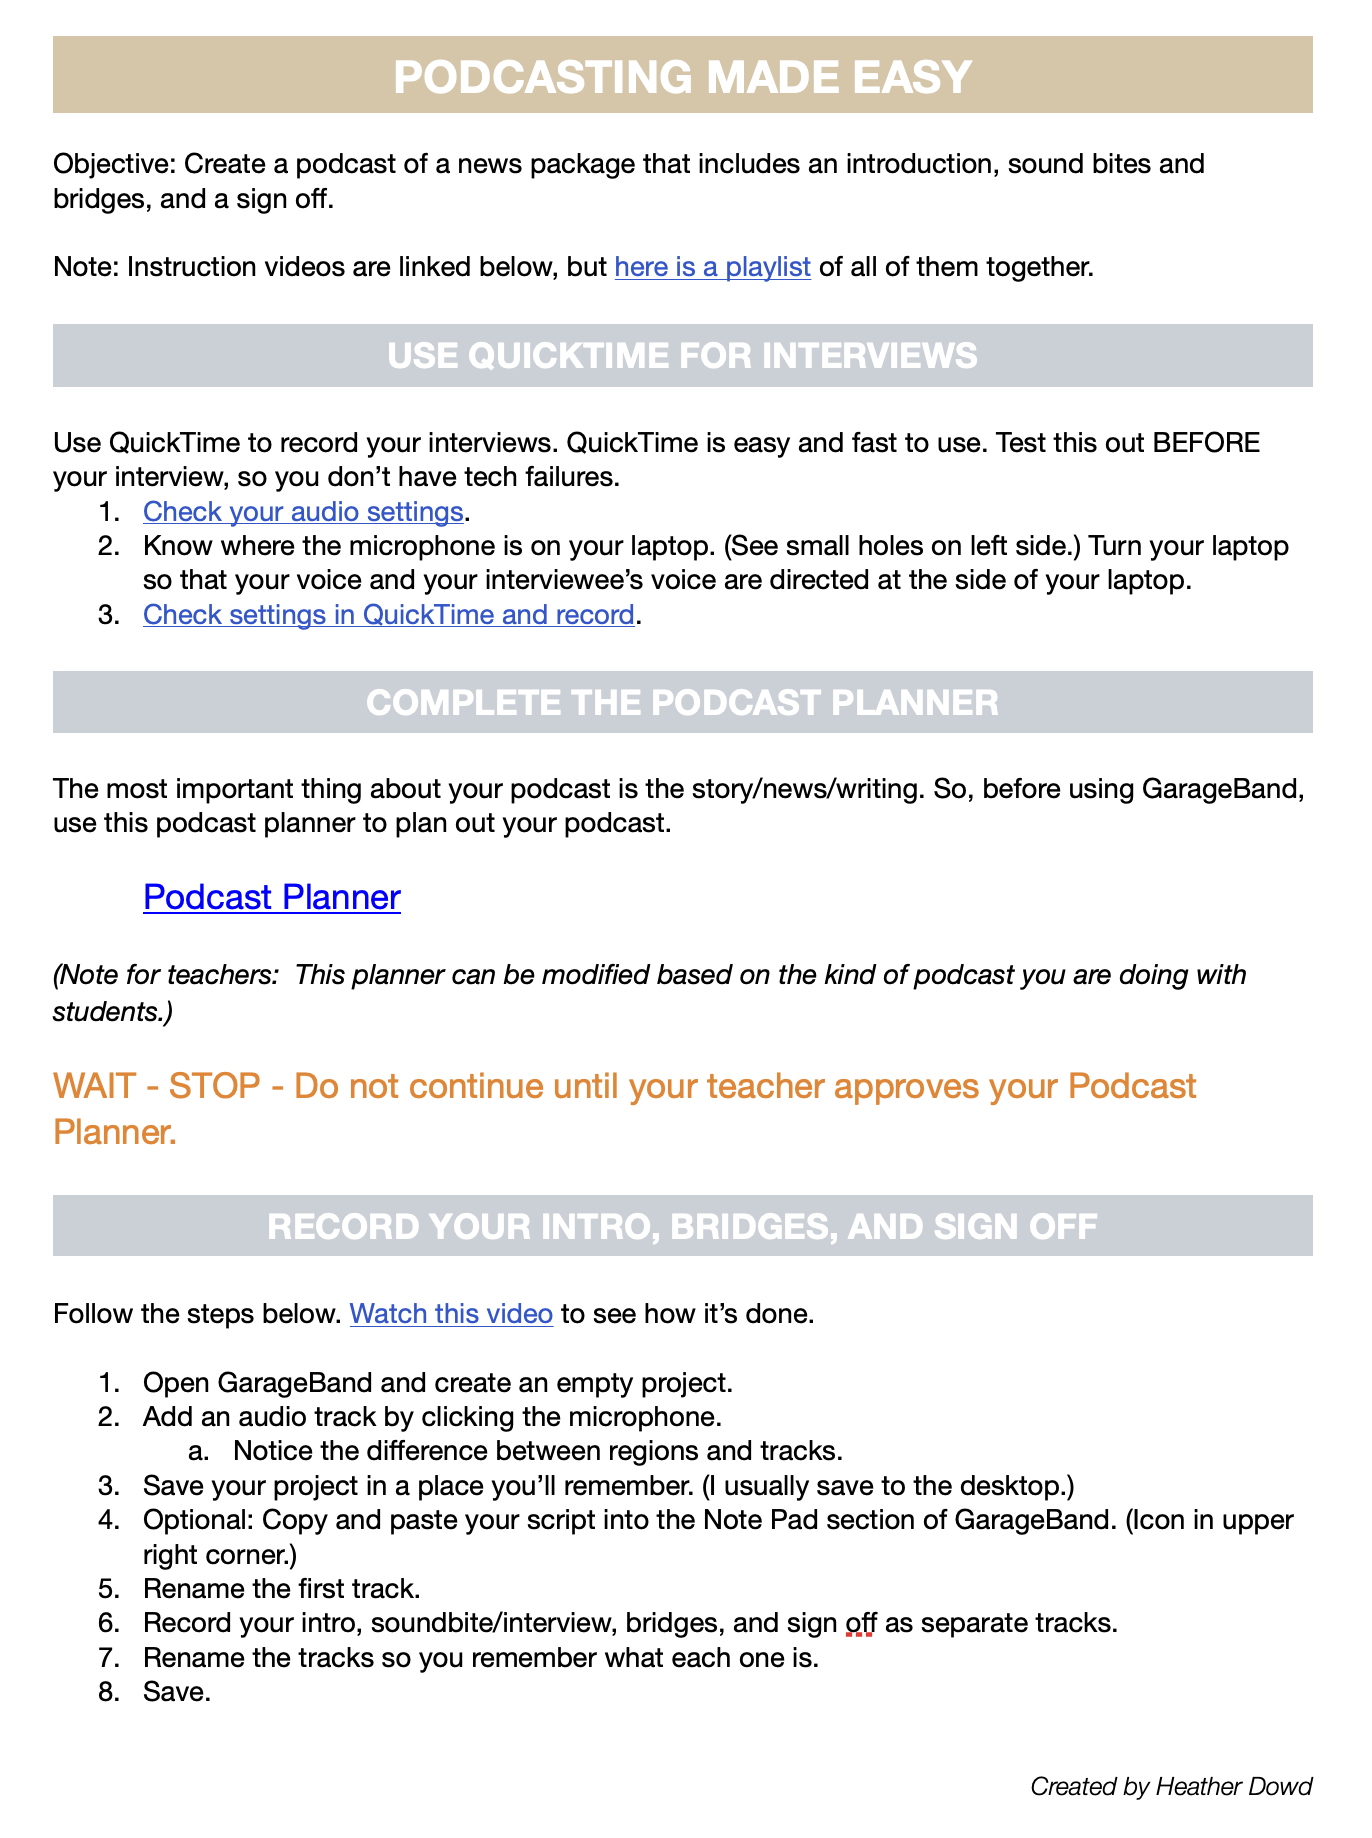 Podcasting made easy guide for students to follow.